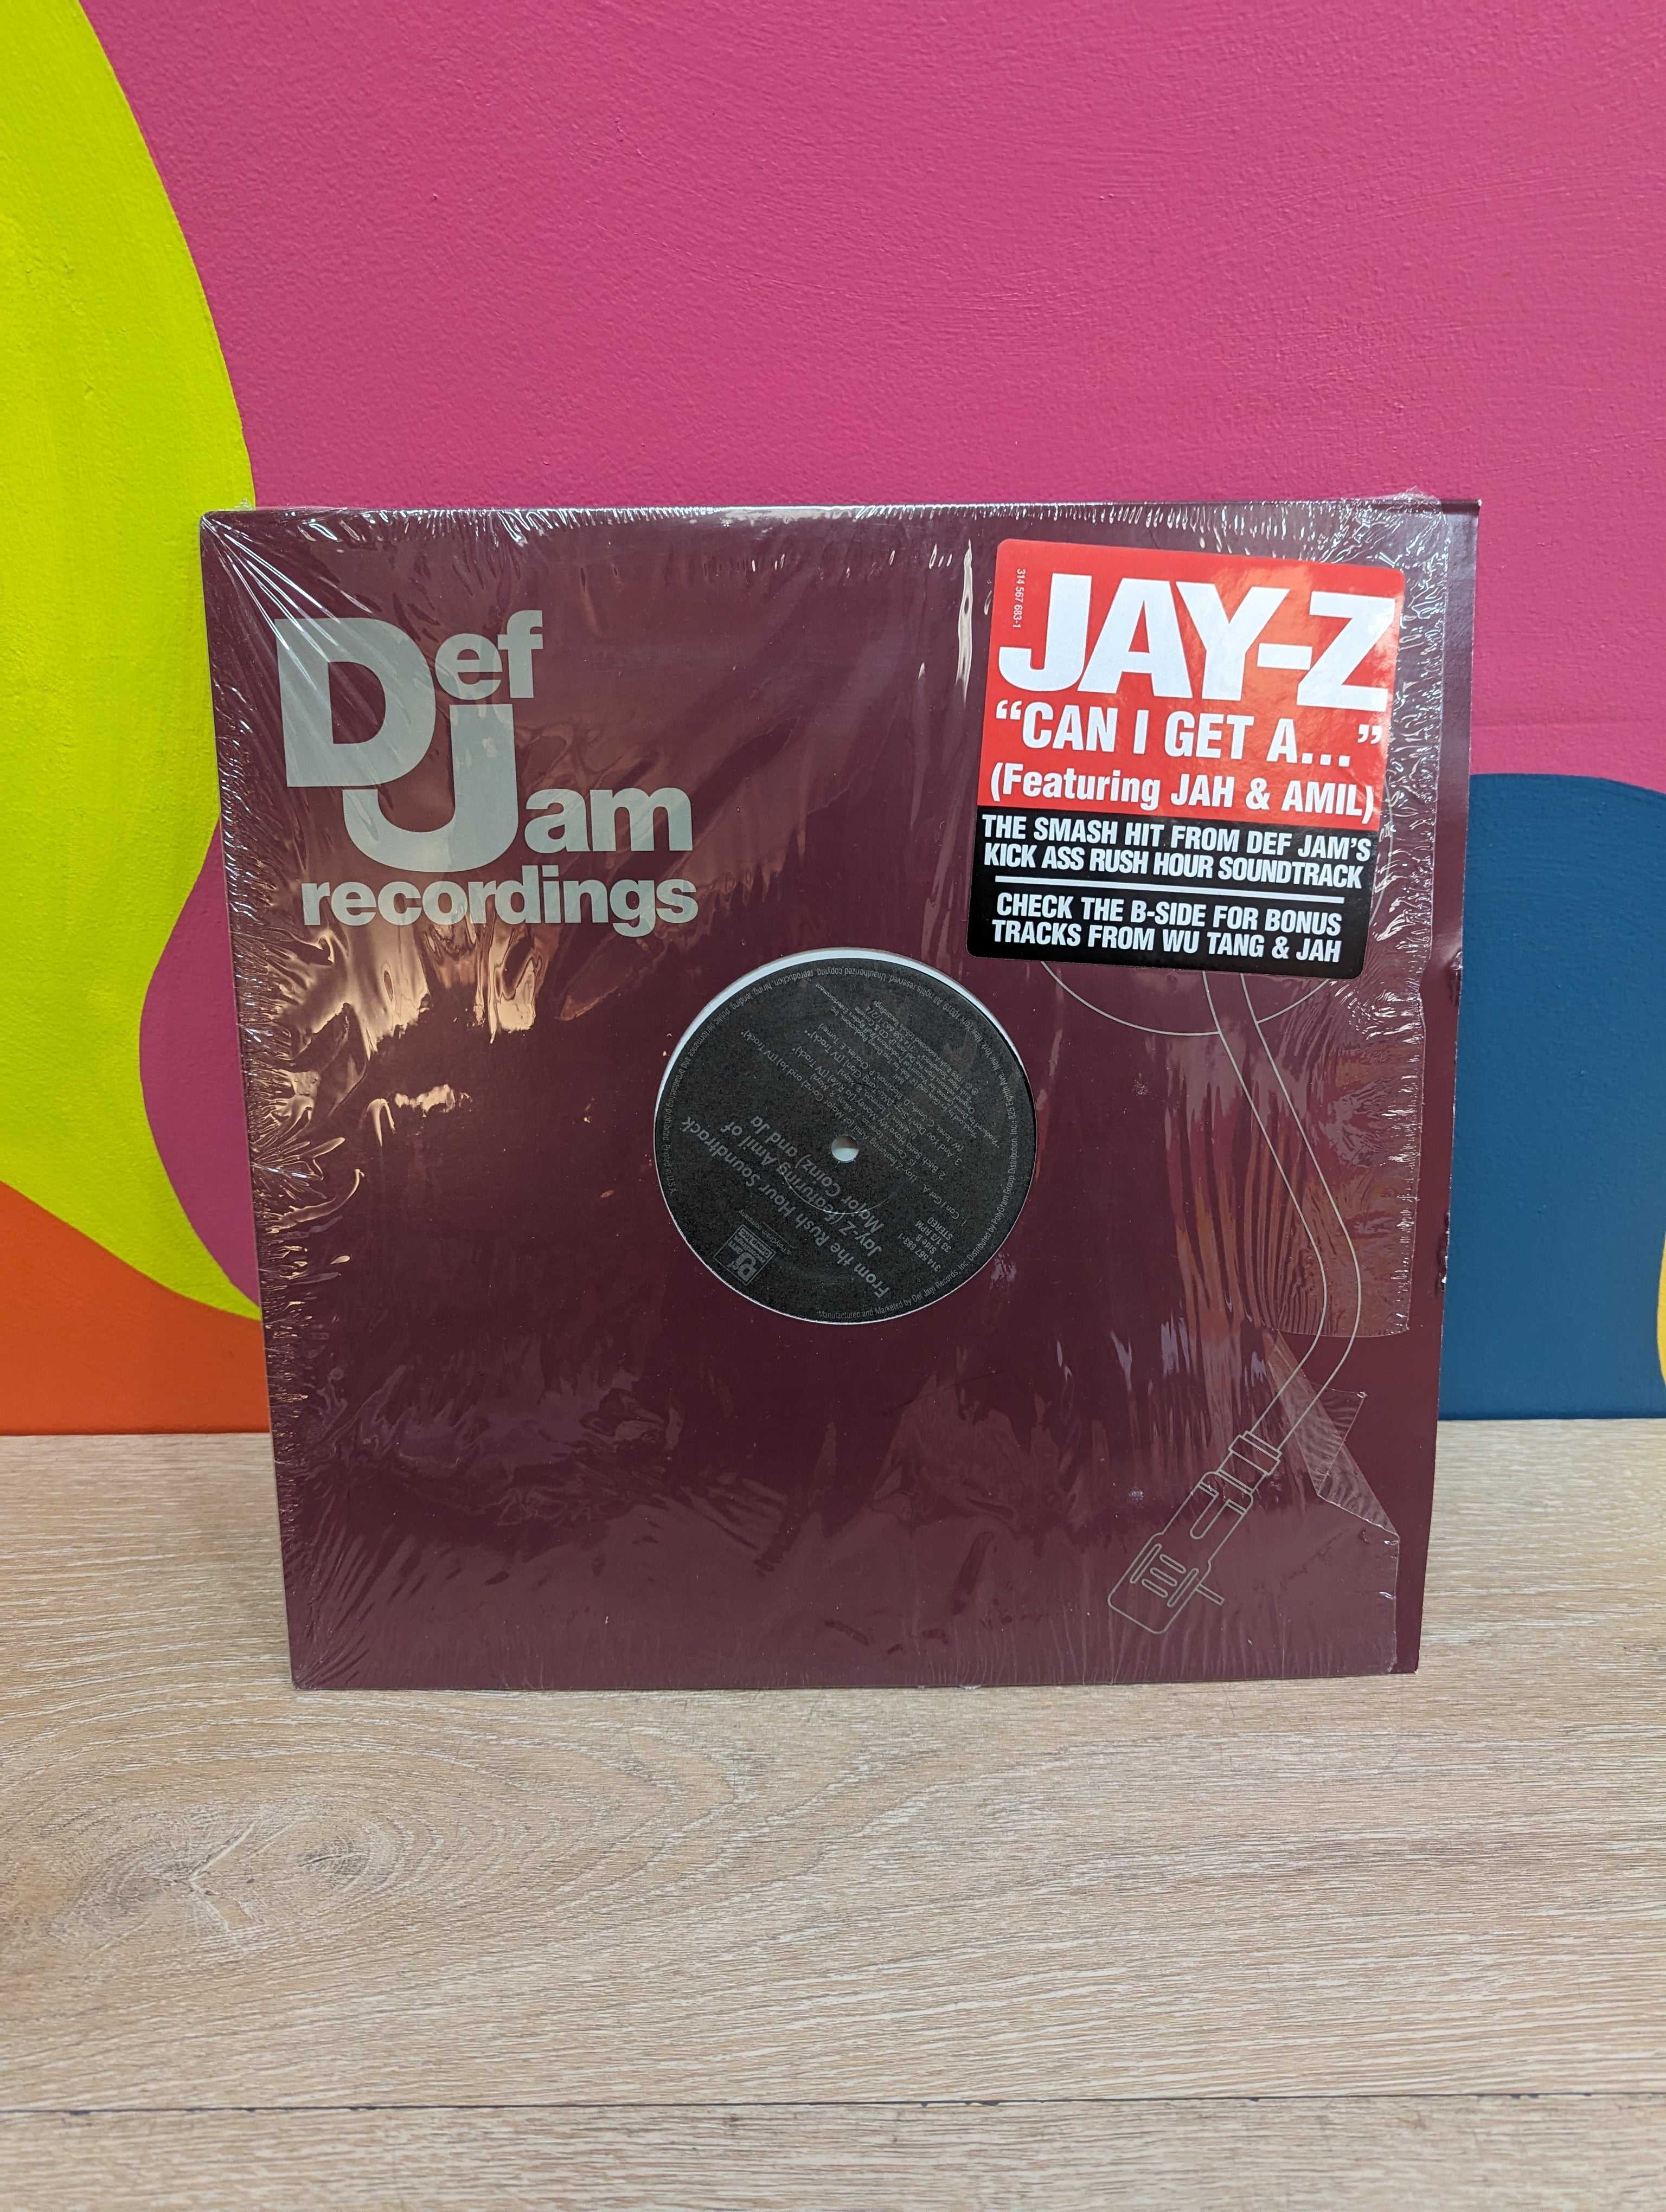 Jay-Z Featuring Jah & Amil – Can I Get A... Vinyl